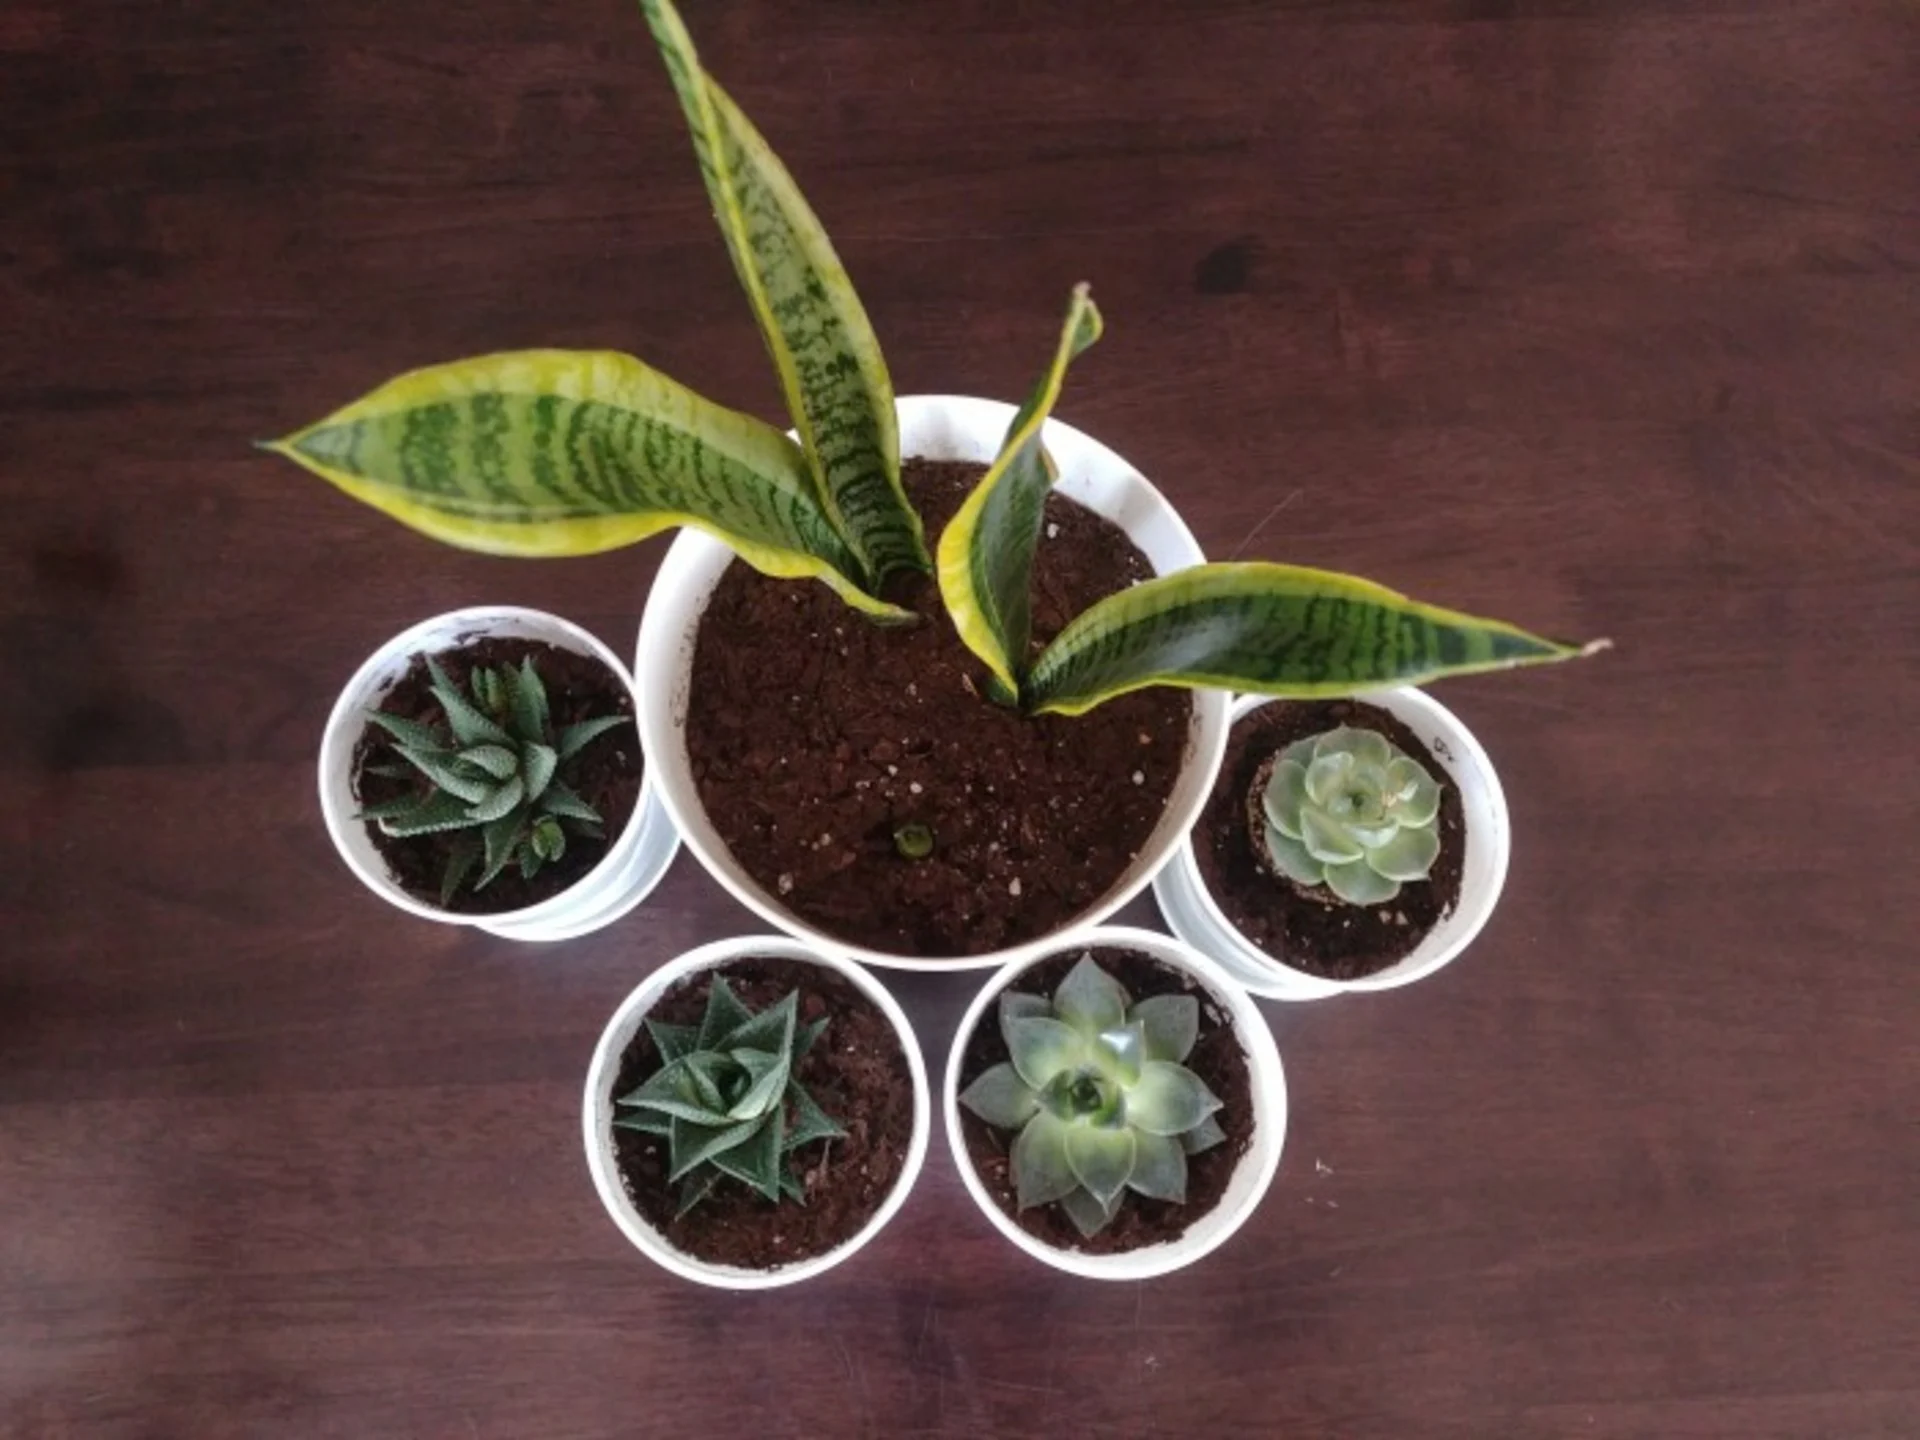 Thinking of bringing your outdoor plant indoors? Read this first